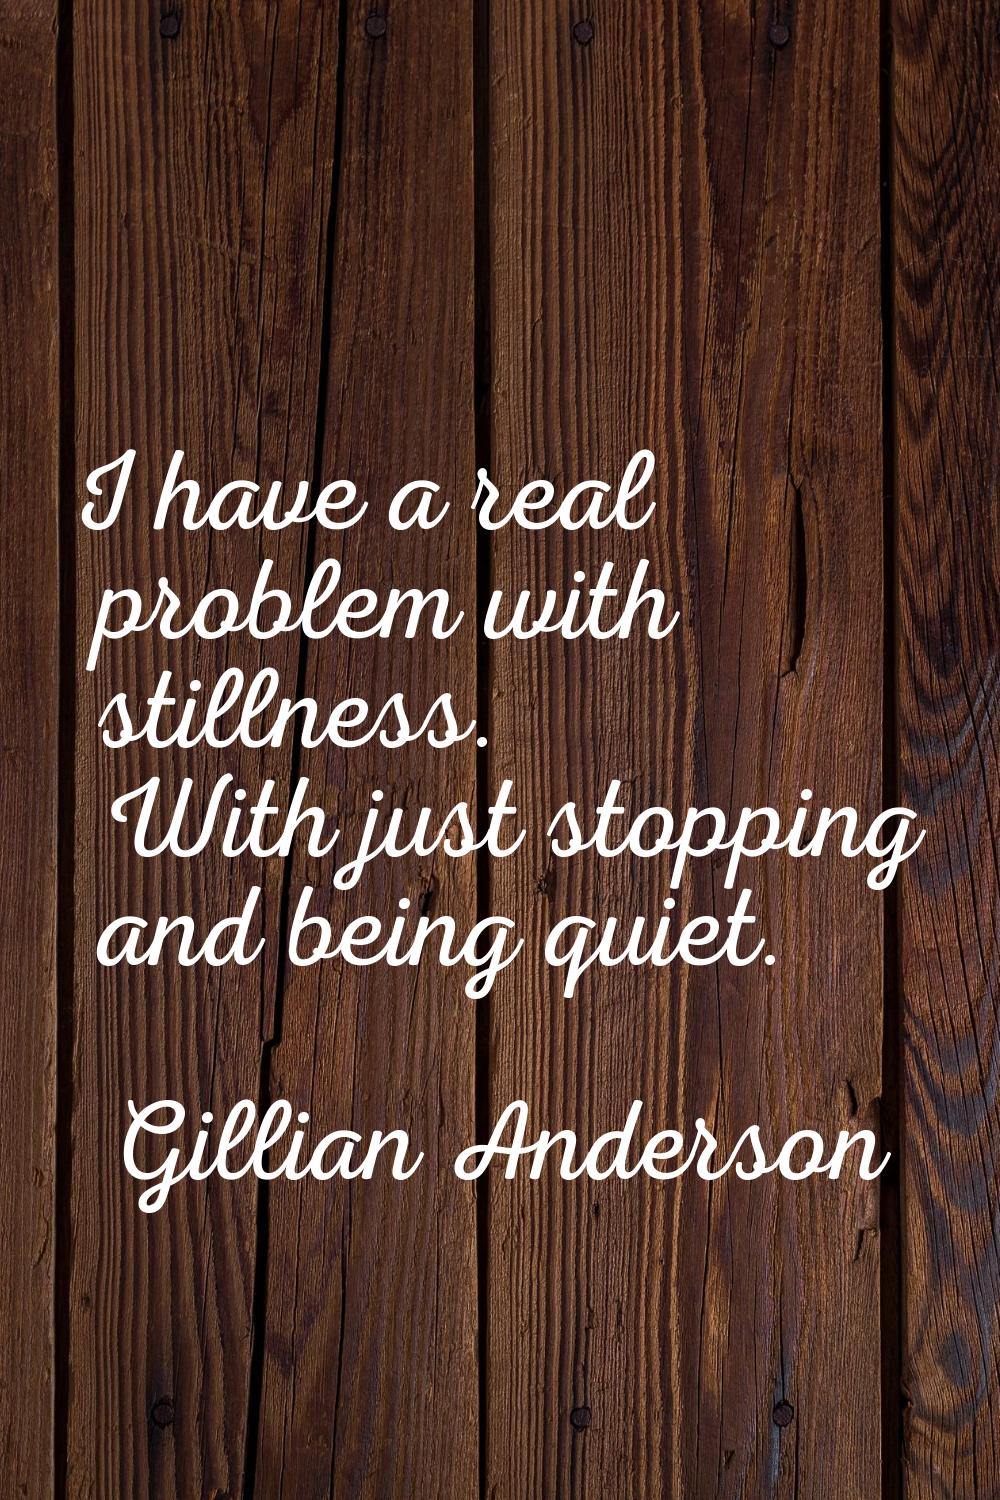 I have a real problem with stillness. With just stopping and being quiet.